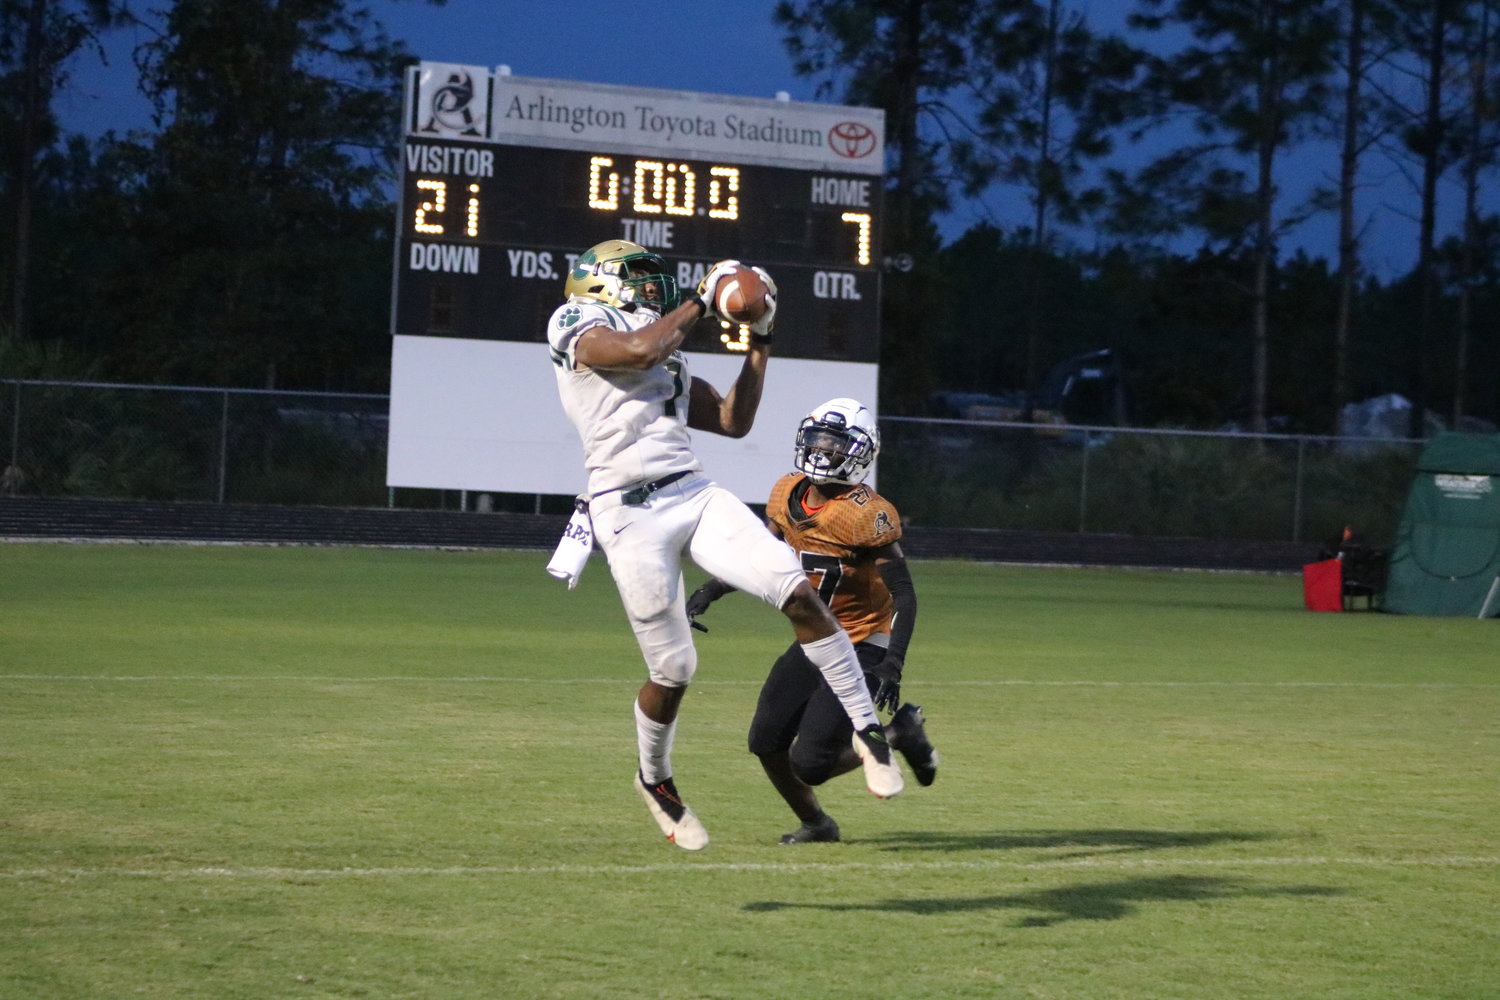 Dom Henry hauls in a touchdown as time expired to give Nease a 28-7 halftime lead over Atlantic Coast on Friday. He caught two touchdown passes on the night.